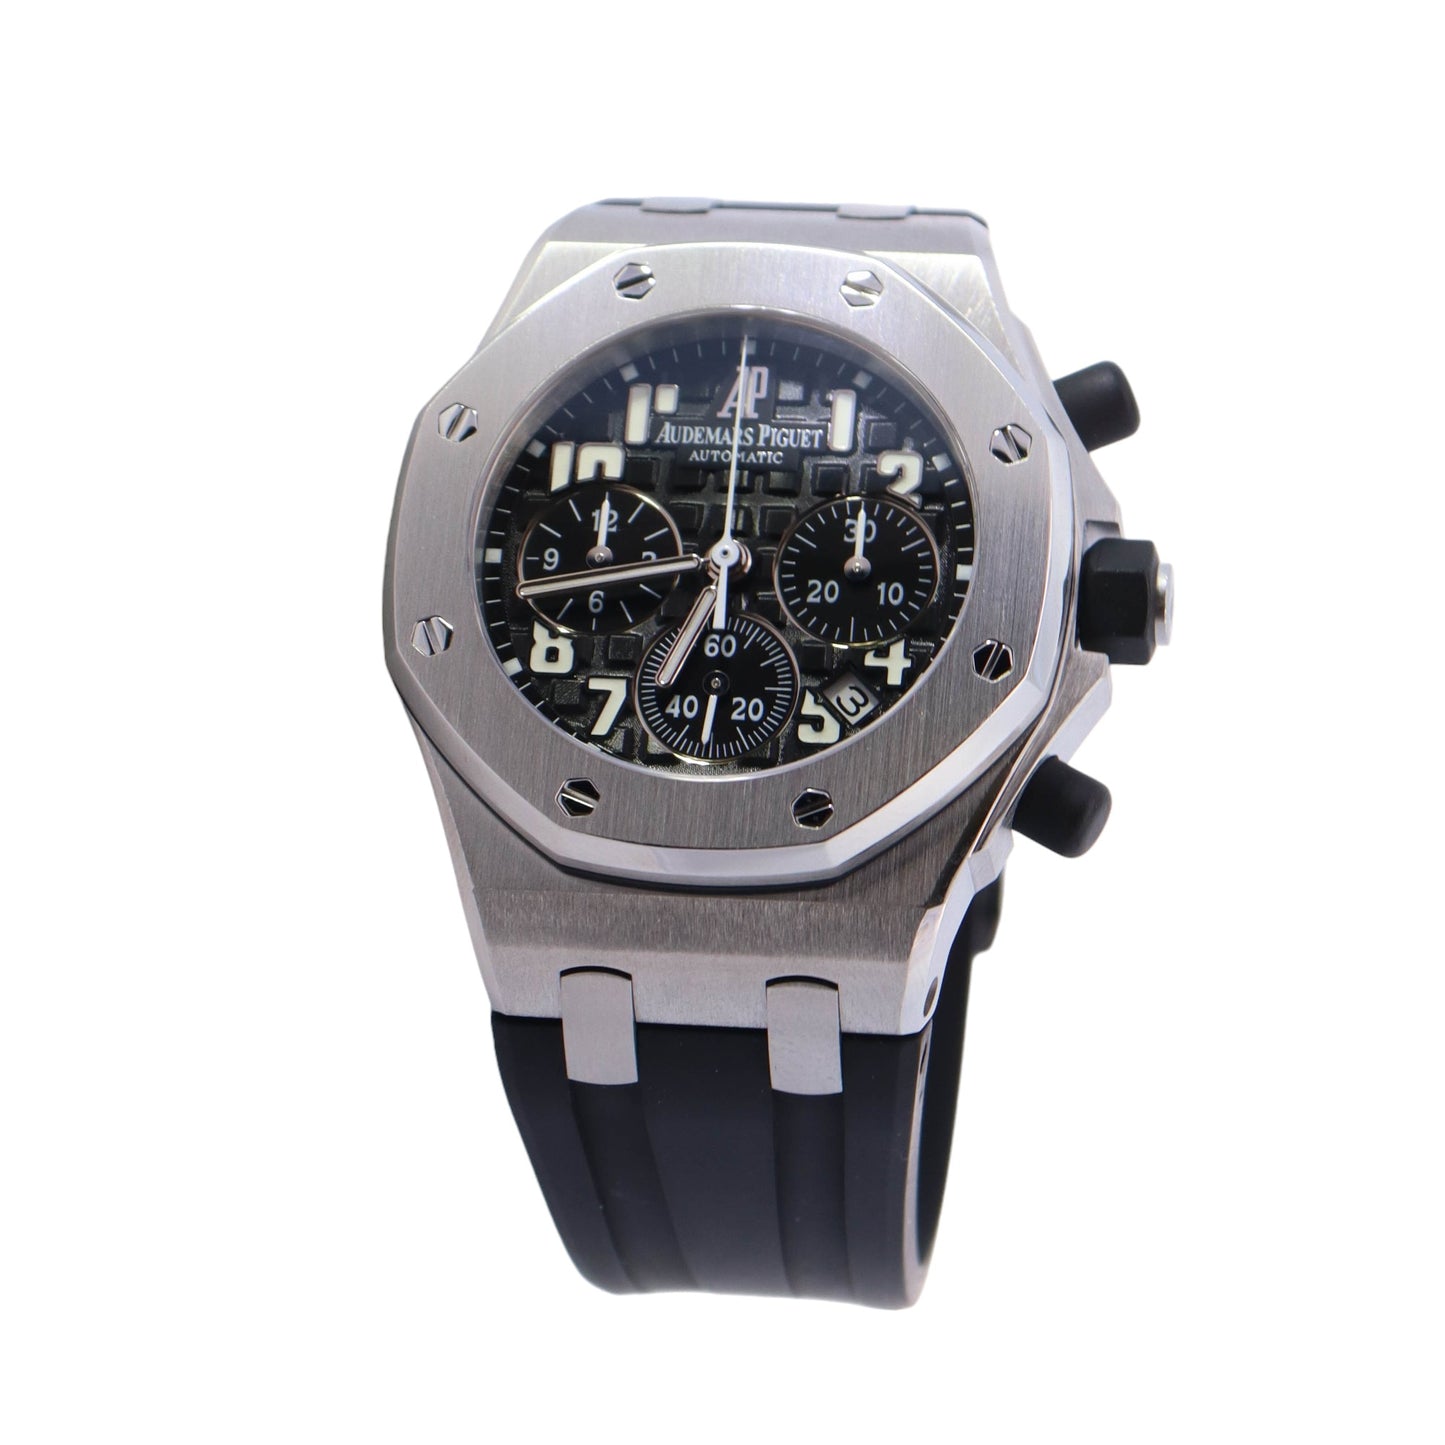 Audemars Piguet Ladies Stainless Steel 37mm Black Chronograph Dial Reference #: 26283ST.OO.D002CA.01 - Happy Jewelers Fine Jewelry Lifetime Warranty